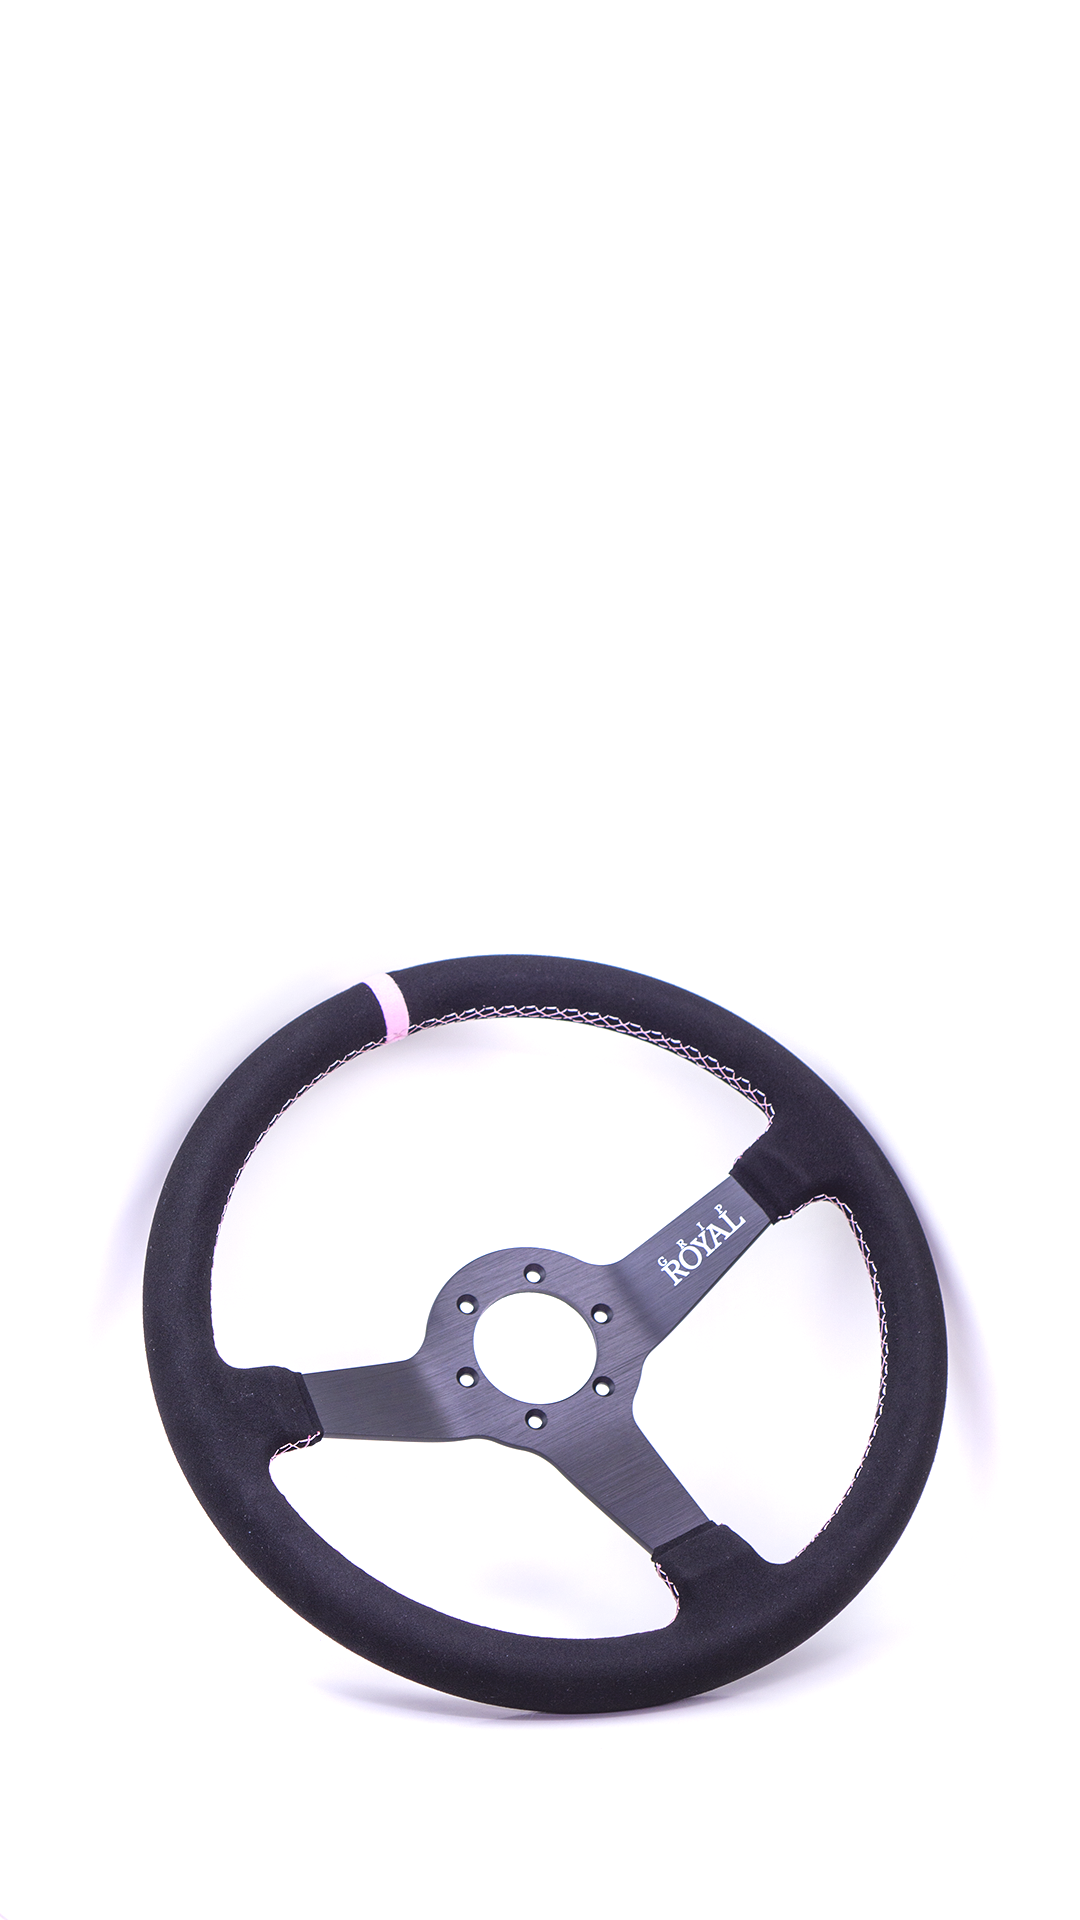 Grip Royal - Brute - 350mm - Suede - Pink TDC - Pink Stitch